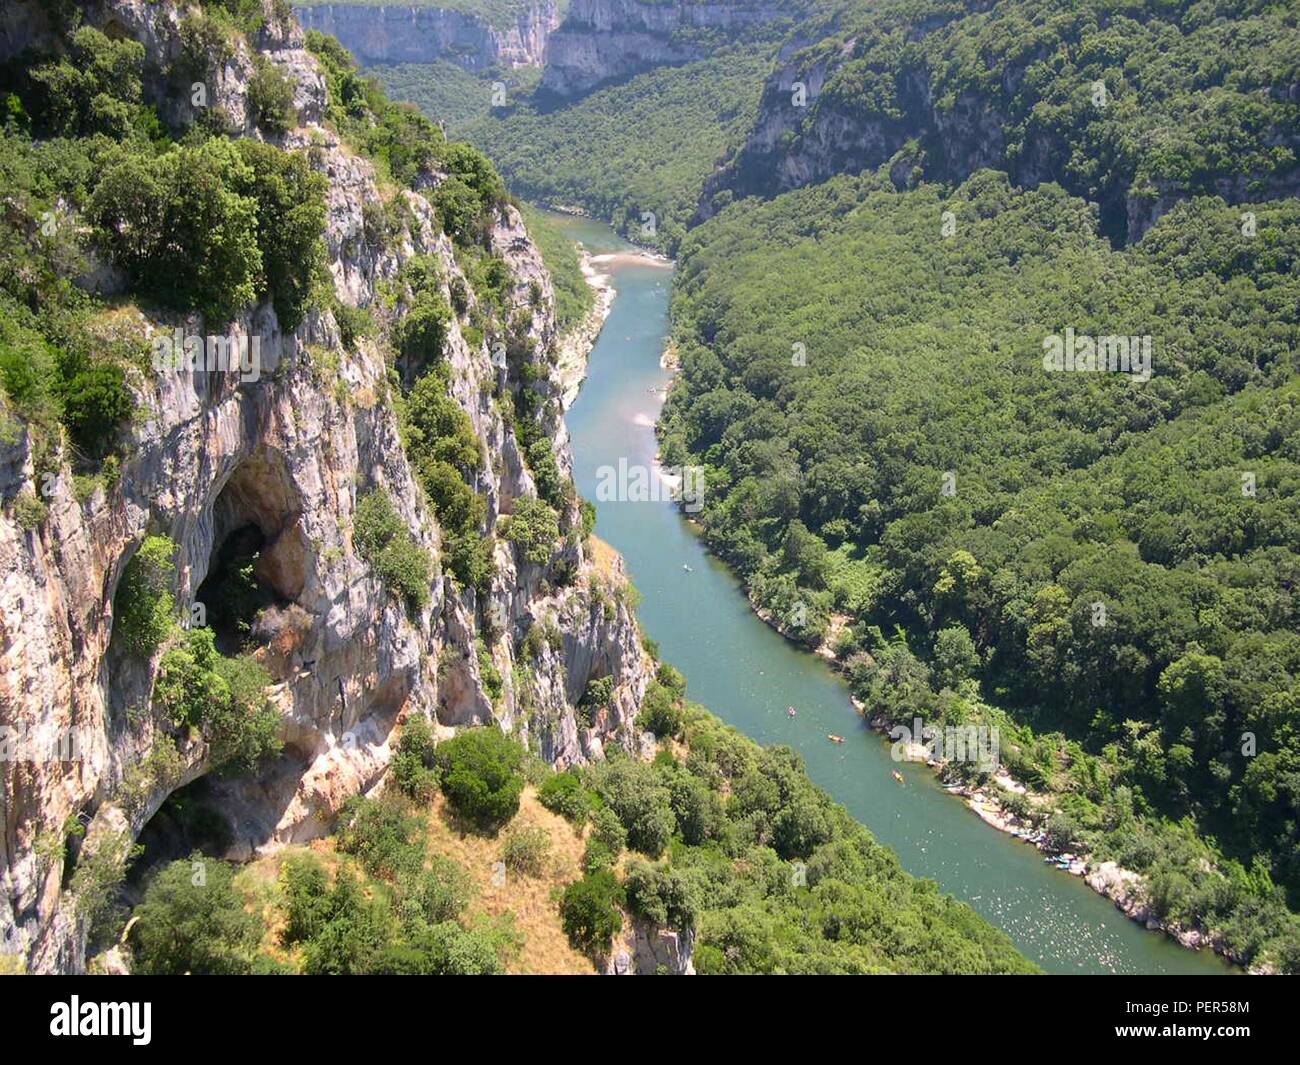 The Ardeche River Running Through The Gorges De L Ardeche France Stock Photo Alamy